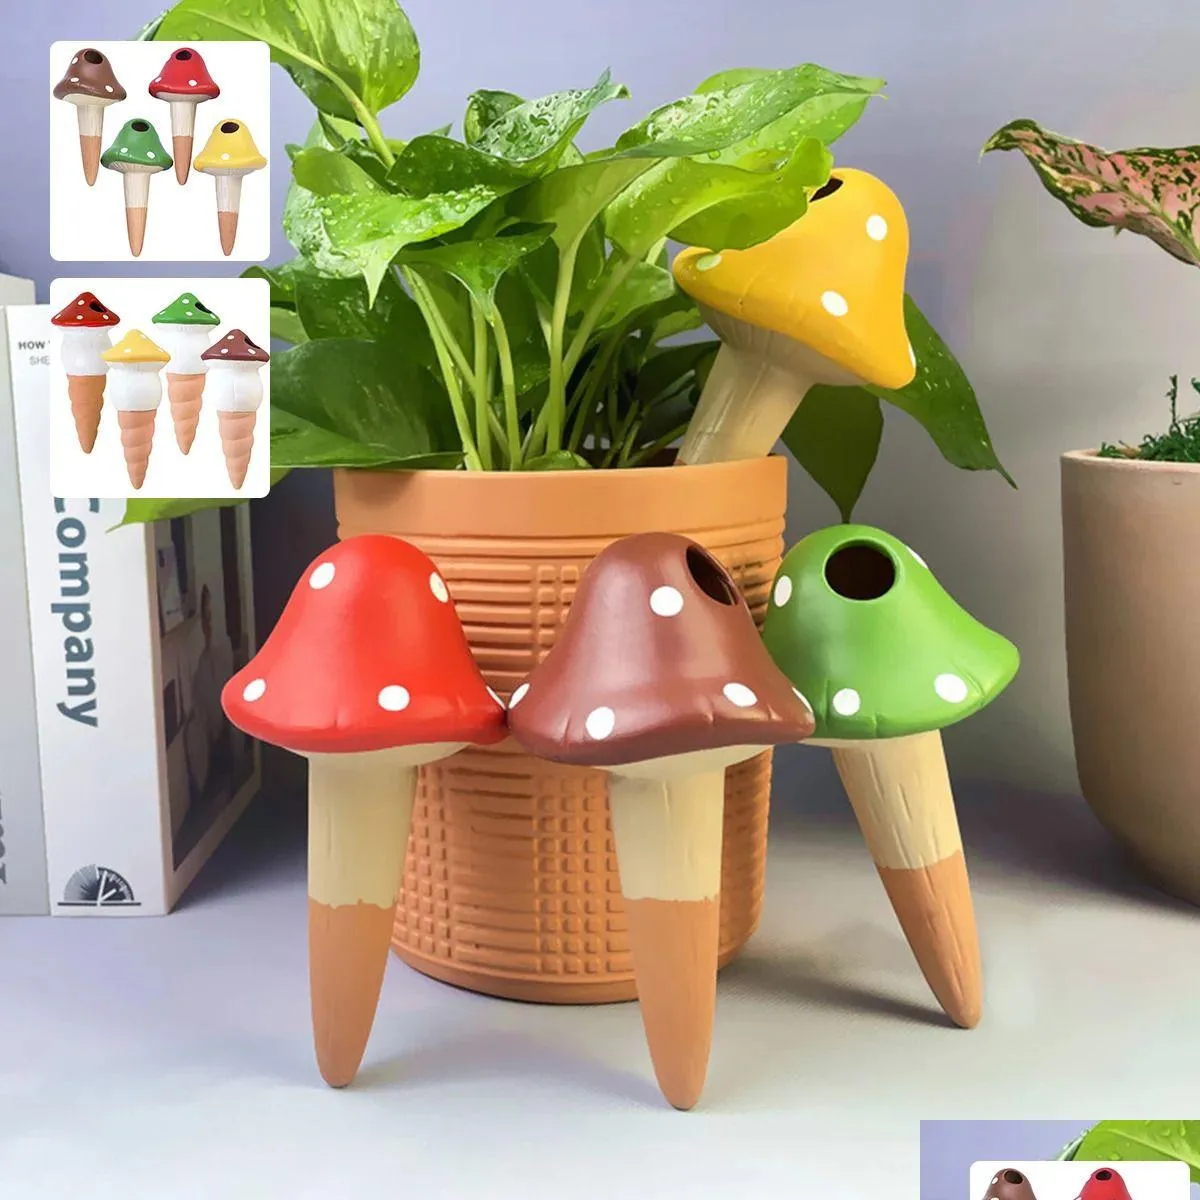 Sprayers 4Pcs Self-Watering Mushroom Spikes Portable Matic Terracotta Globe Small Potted Plant Waterer Cute Garden Device 231122 Dro Dhk5H